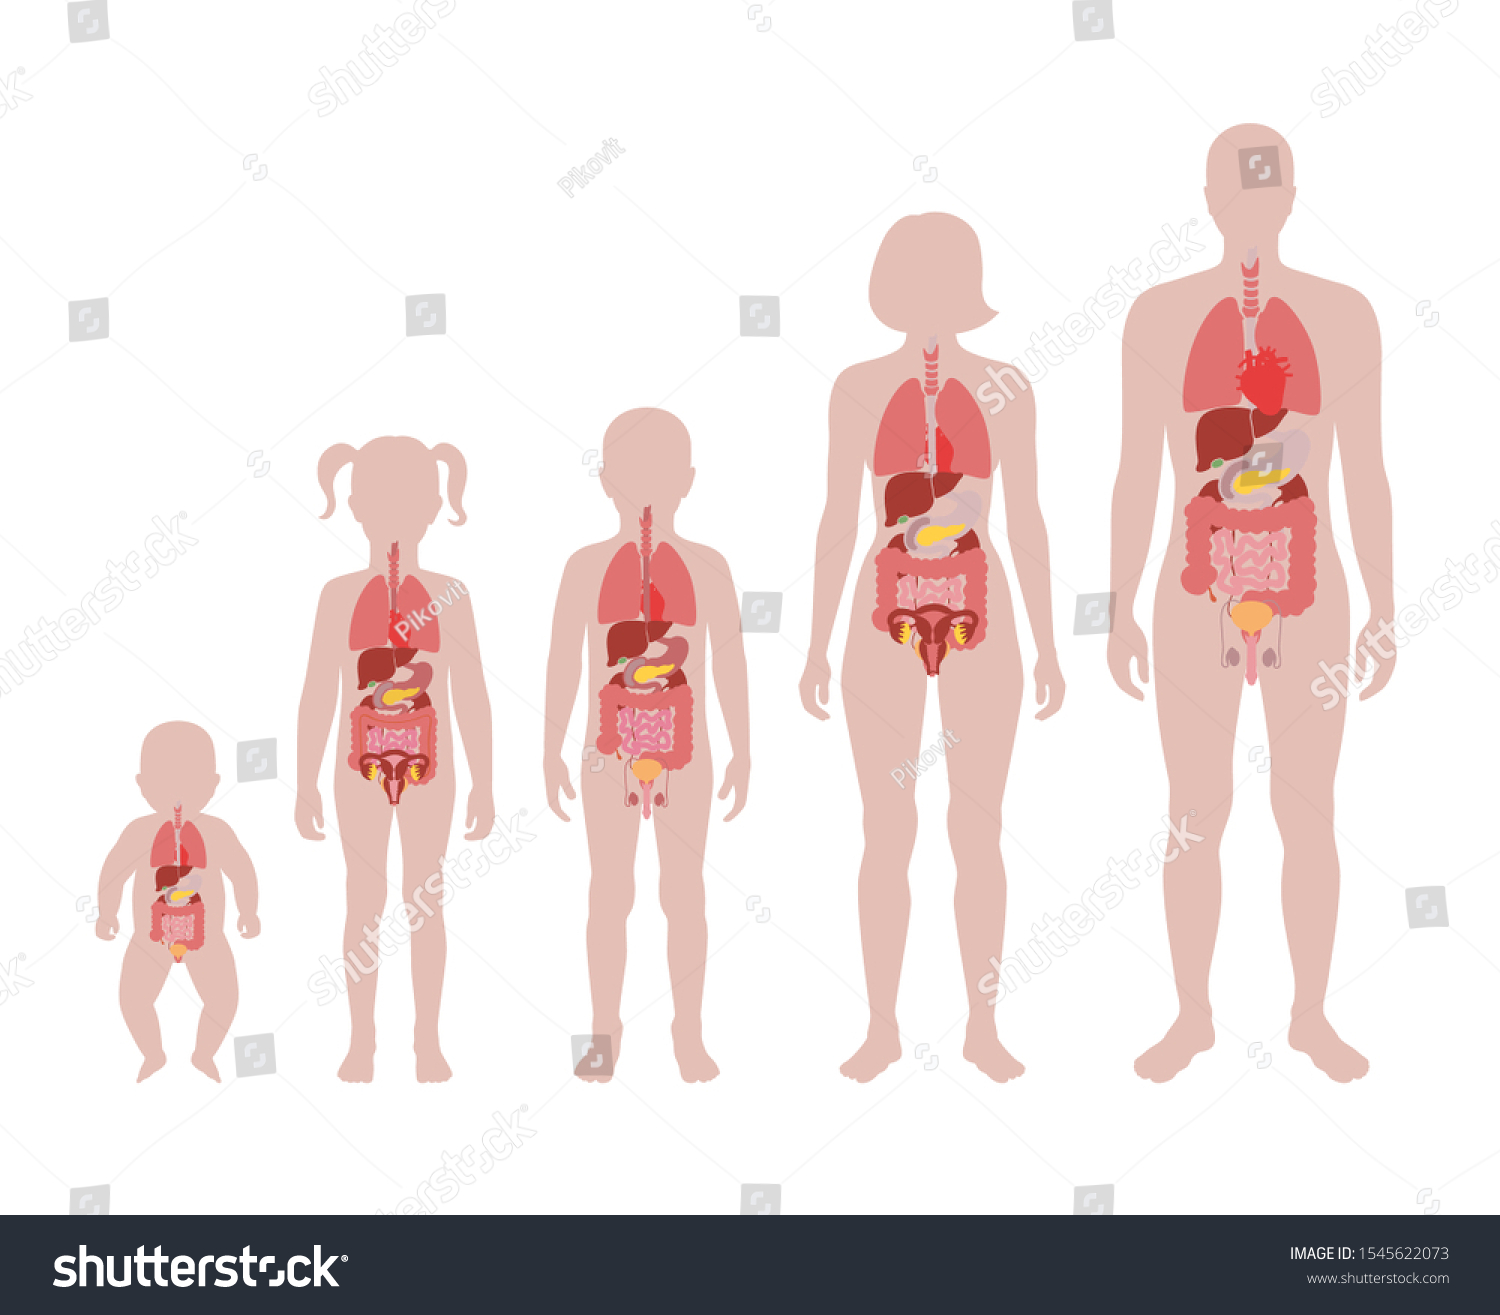 Vector isolated illustration of internal organs in baby, girl, boy, adult man and woman body. Stomach, liver, intestine, bladder, lung, testicle, uterus, pancreas, kidney, heart, bladder icon.  #1545622073